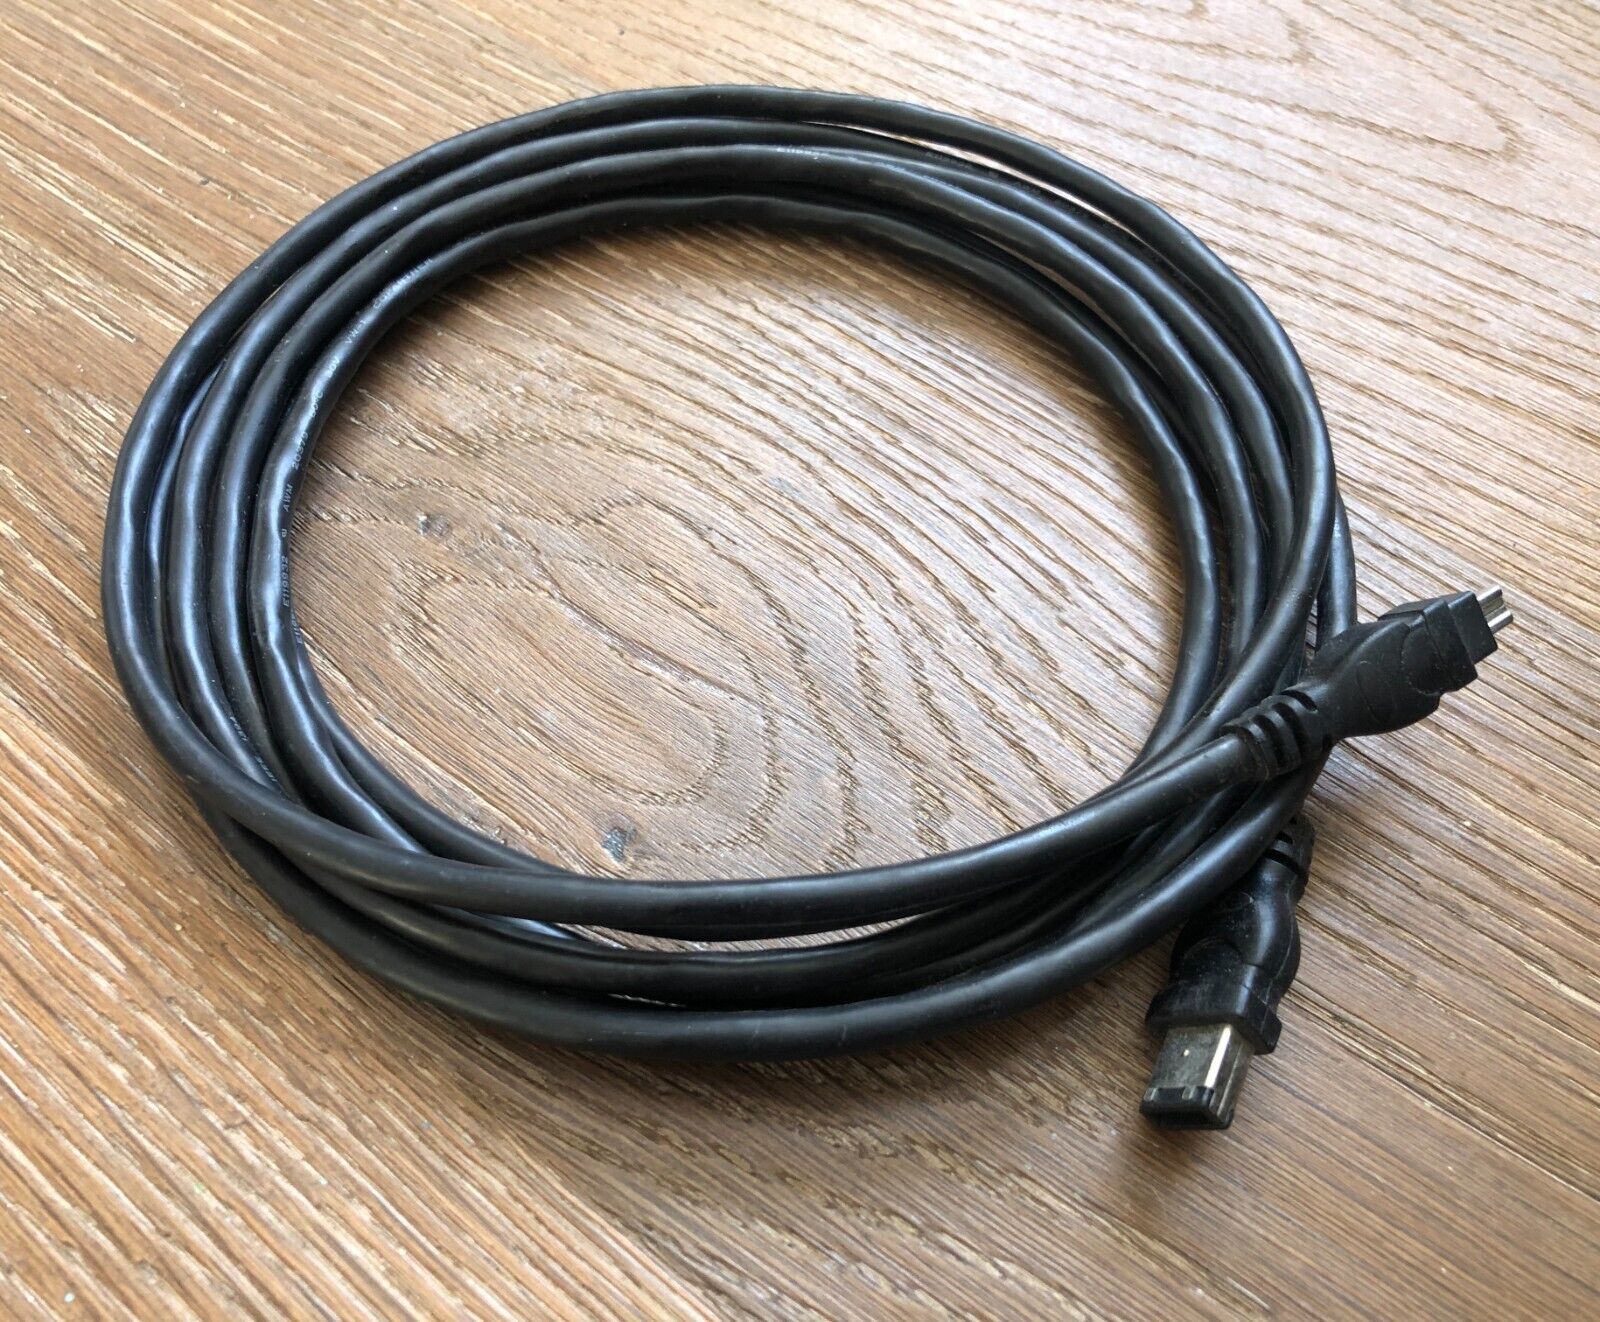 10ft Firewire 400 6Pin to 4 Pin Cable IEEE-1394a DV Camcorder HDD Data Black